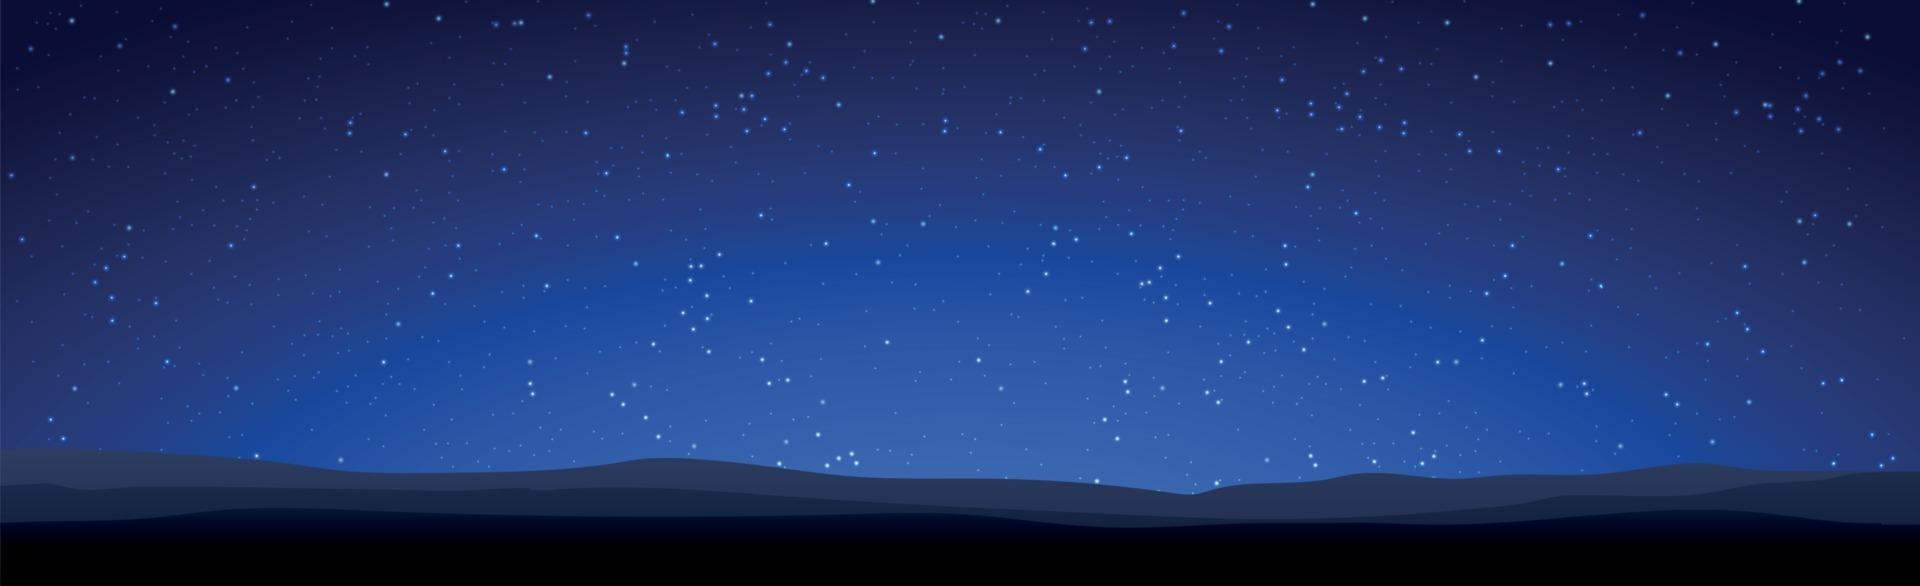 Starry black and blue sky with flying comets vector